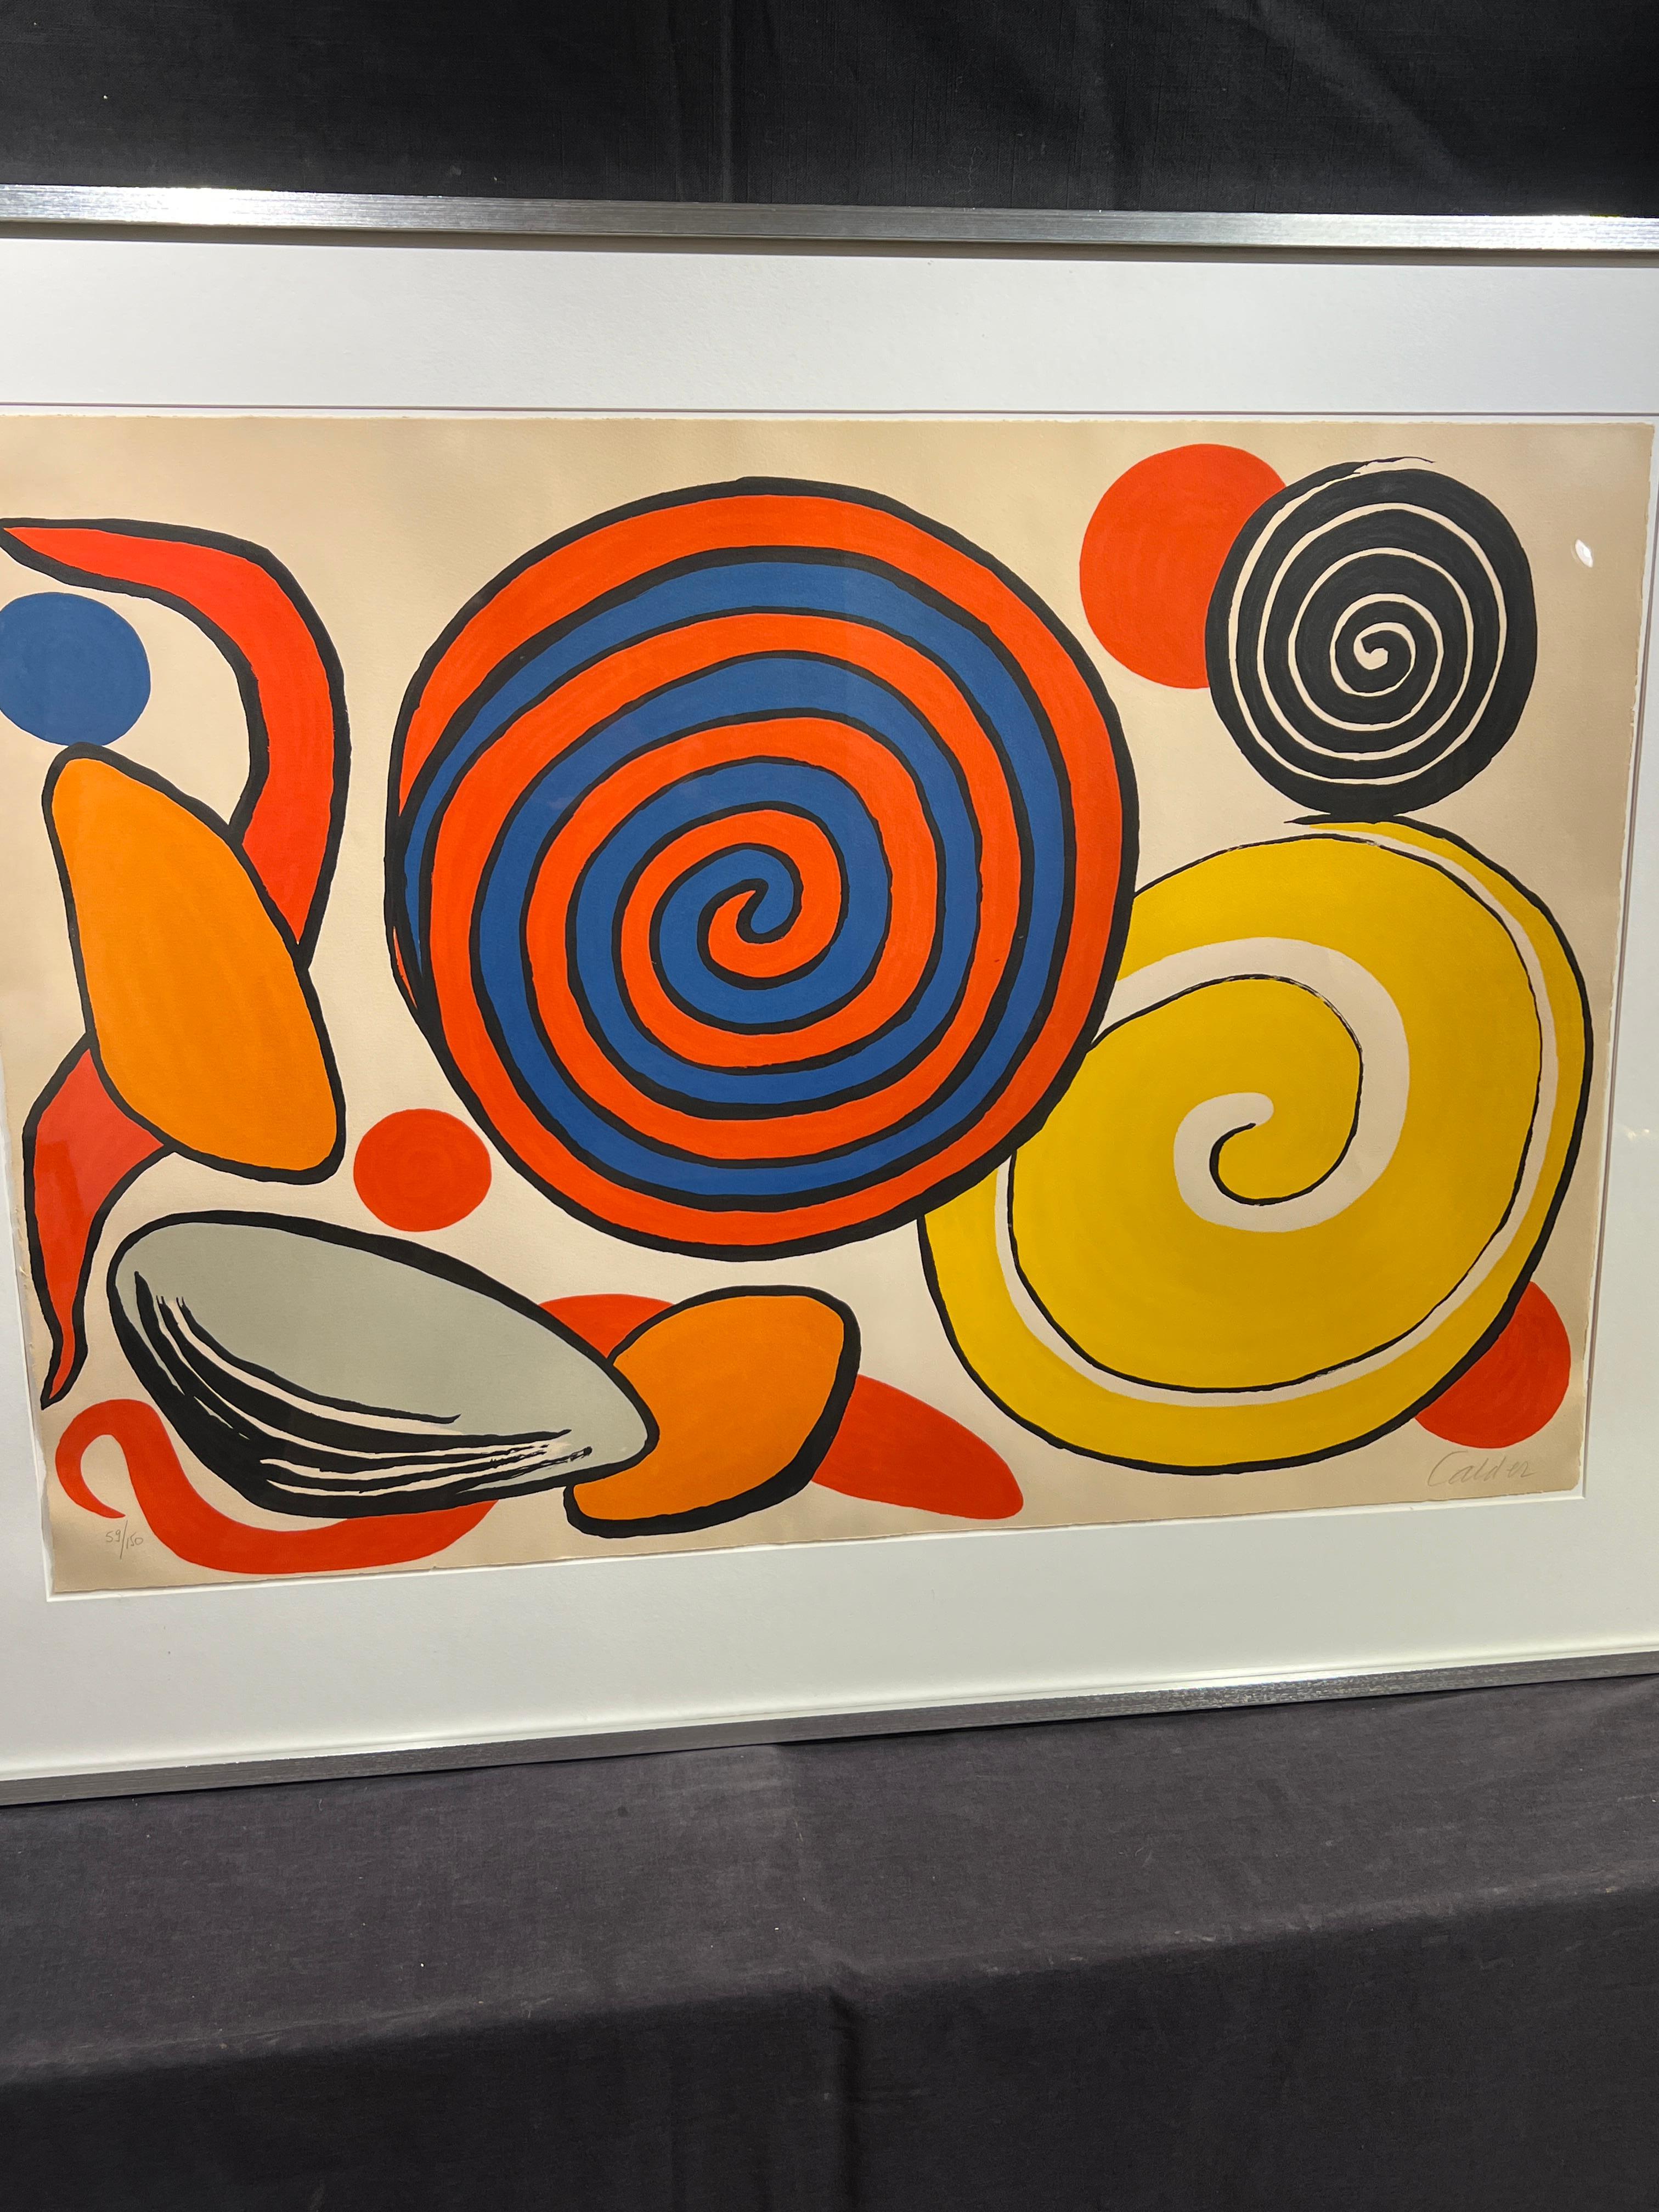 Red and Blue Spirals
Alexander Calder (American, 1898-1976)
Signed in Pencil Lower Right 
Numbered 59/150 in Pencil Lower Left
26 x 37 inches
35.5 x 46 inches with frame

One of America's best known sculptors, 